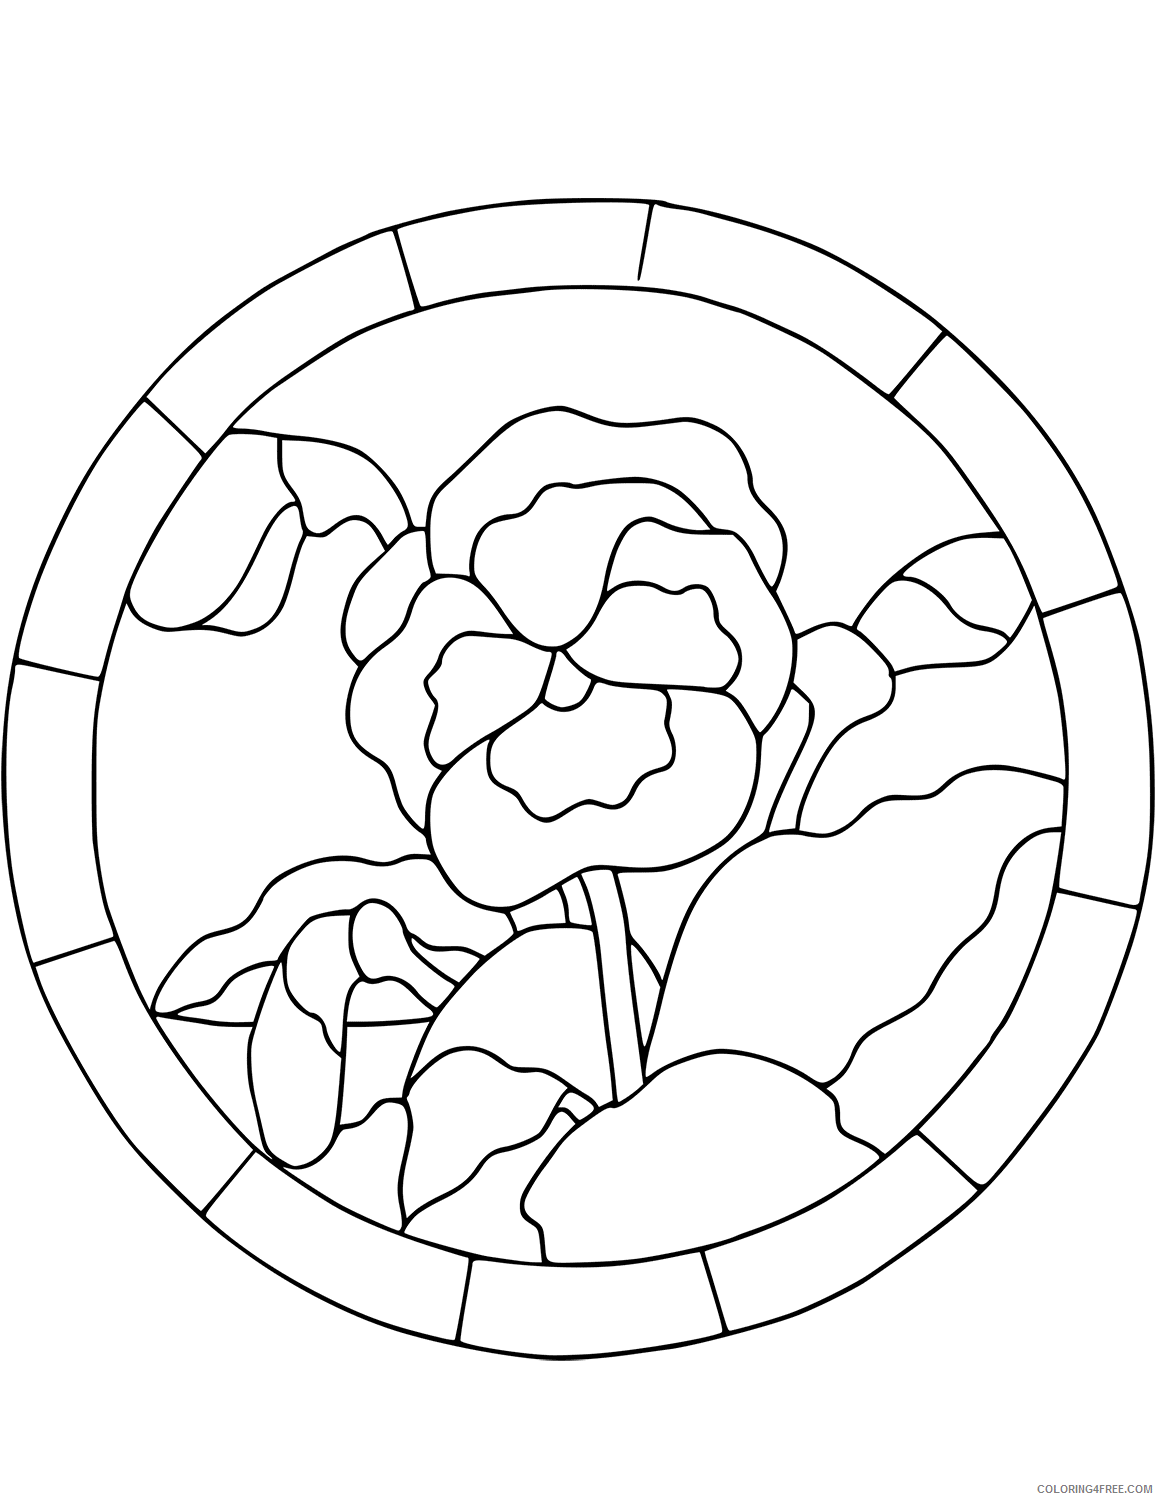 Printable Flower Coloring Pages Flowers Nature stained glass pansy flower 2021 Coloring4free